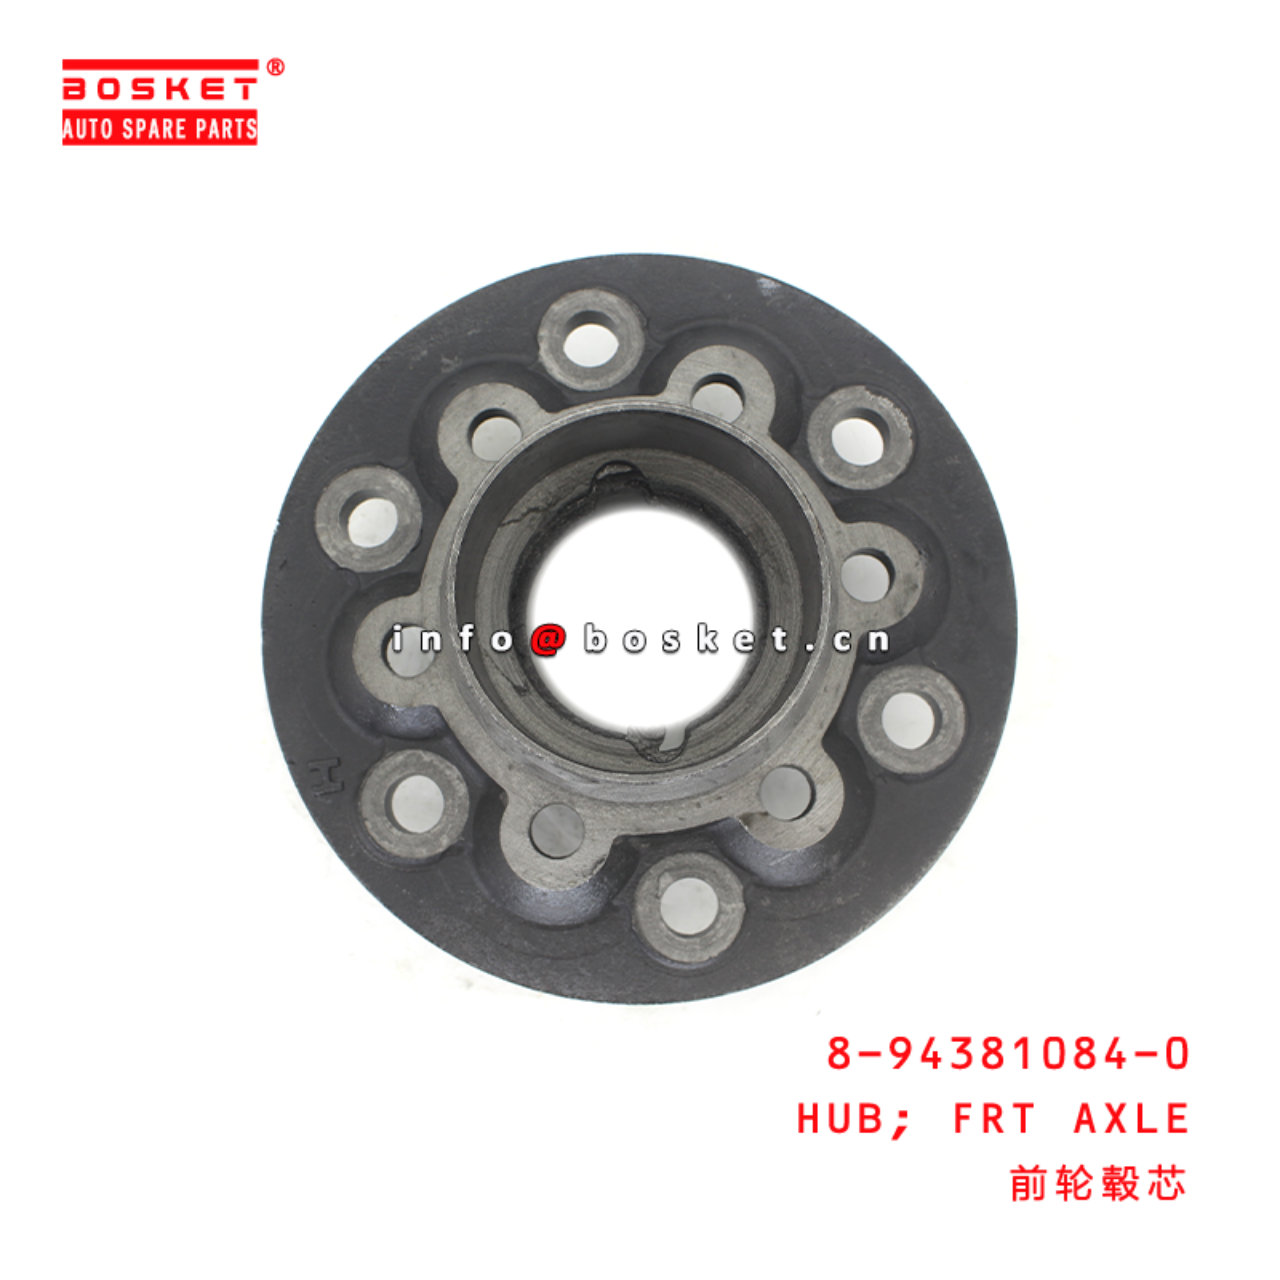 8-94381084-0 Front Axle Hub suitable for ISUZU 8943810840 - For 